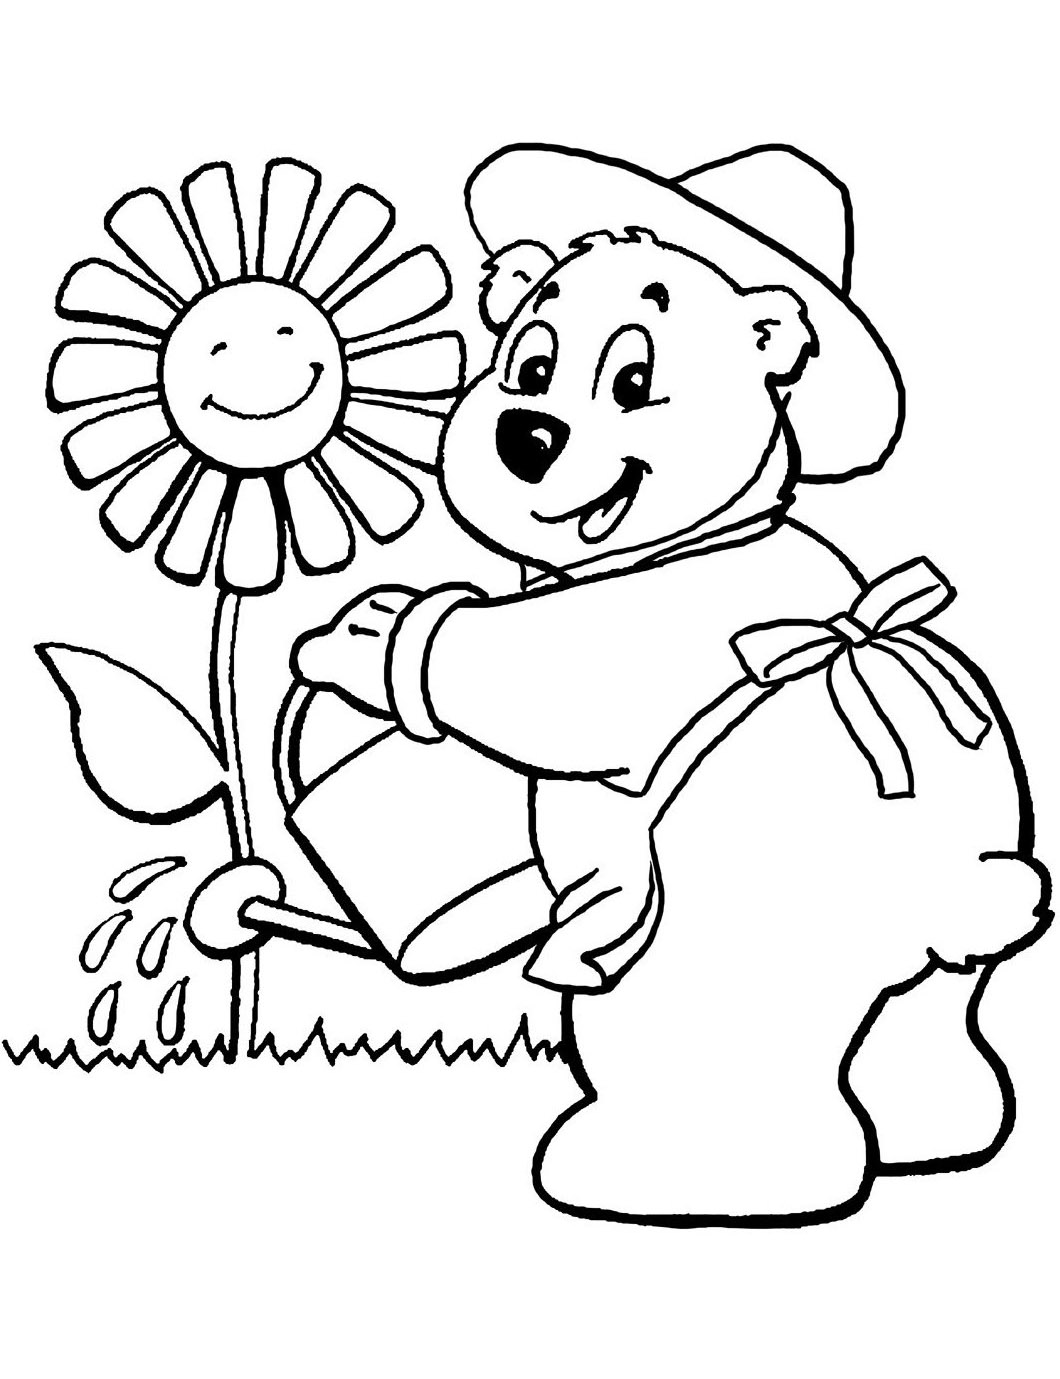 Bears free to color for kids - Bears Kids Coloring Pages